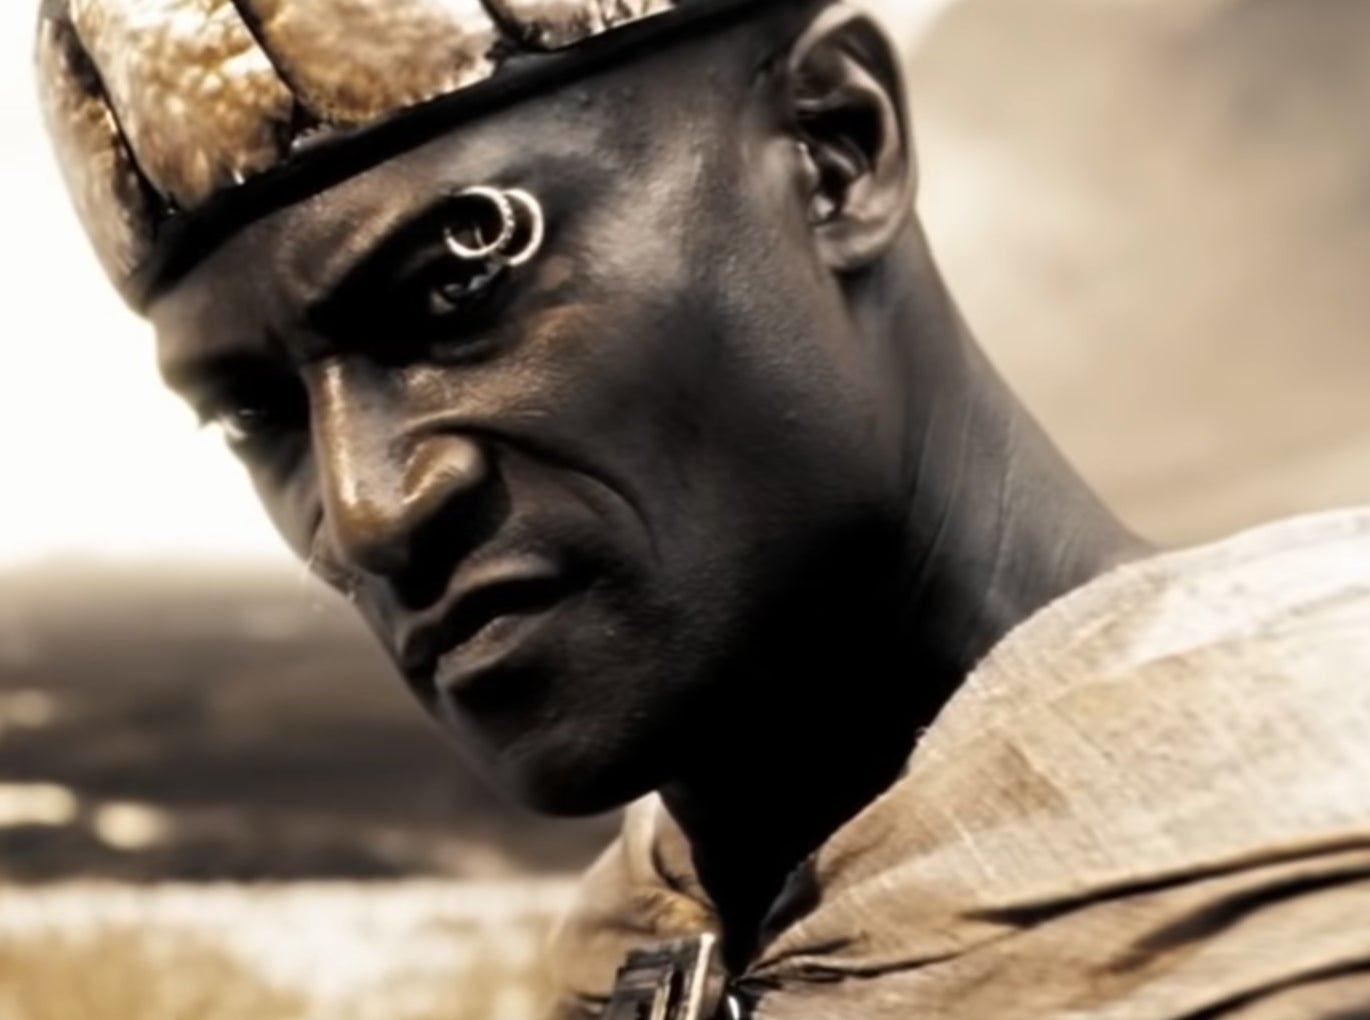 Peter Mensah in 300 with two rings through his eyebrows